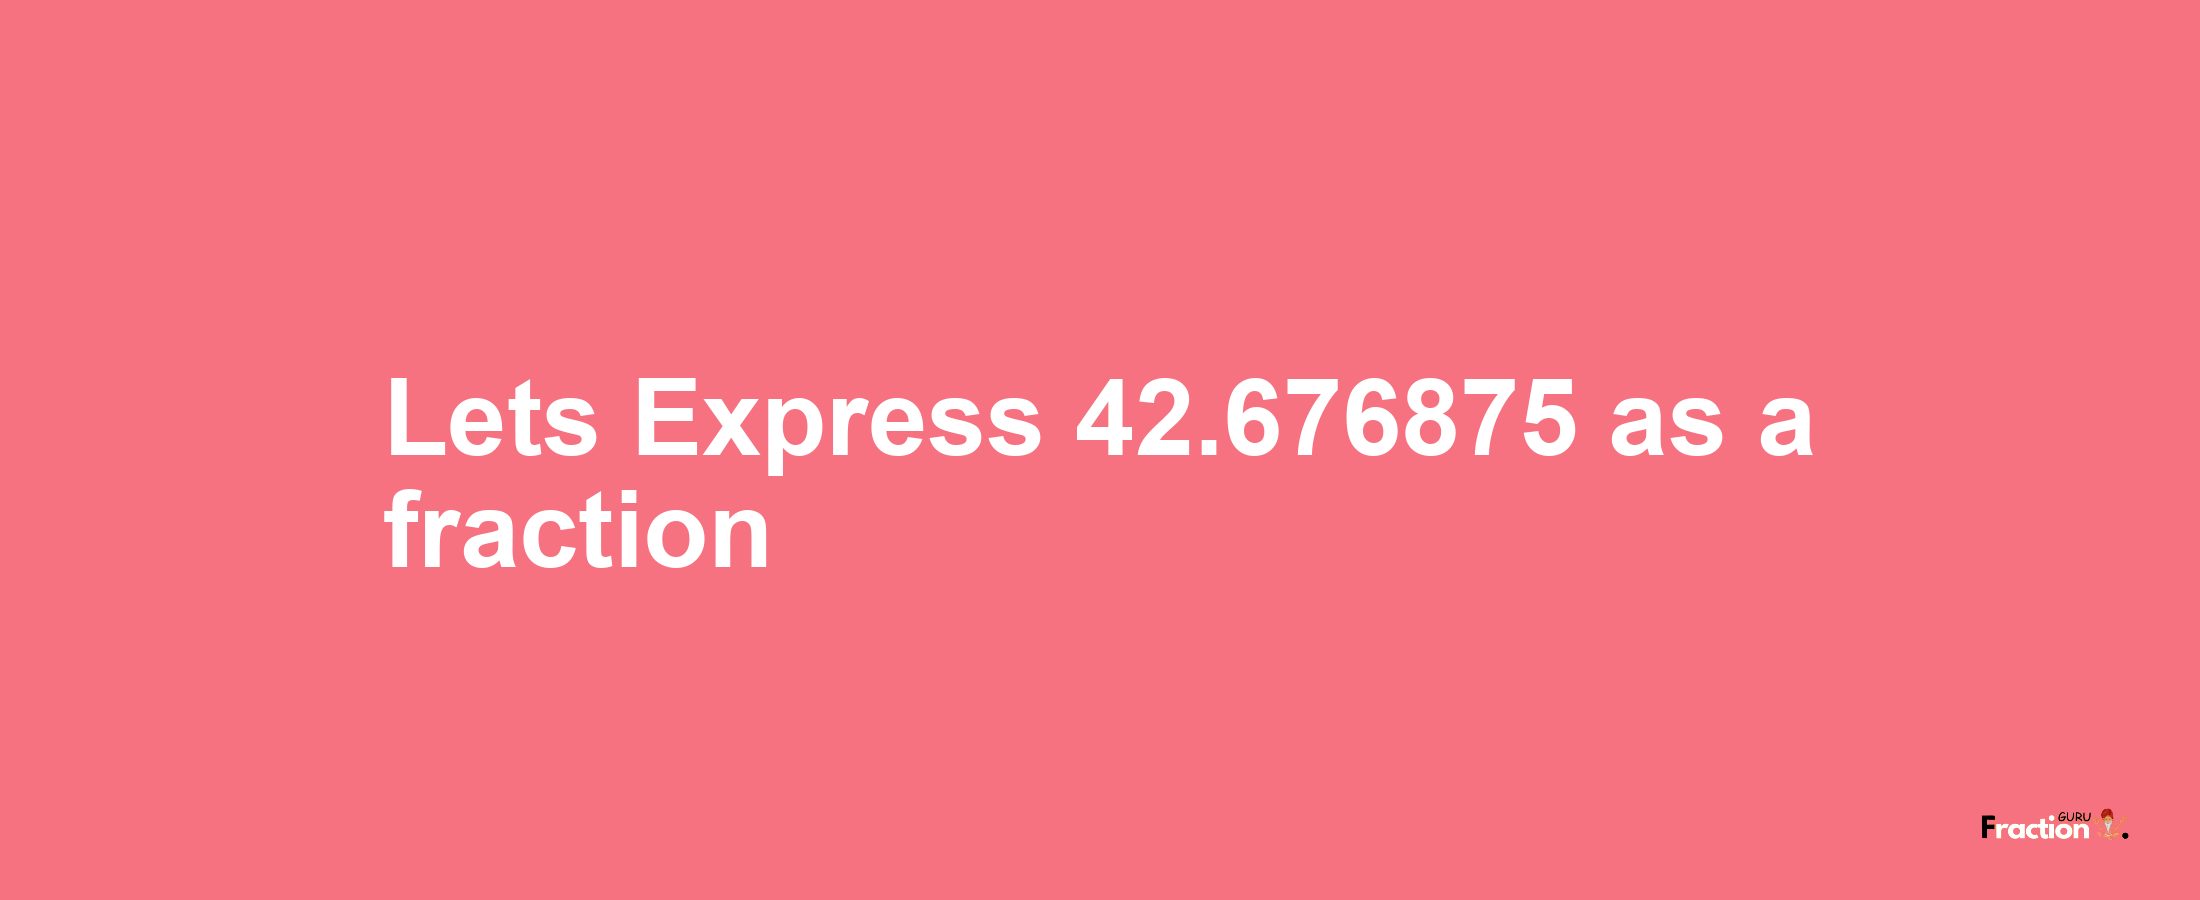 Lets Express 42.676875 as afraction